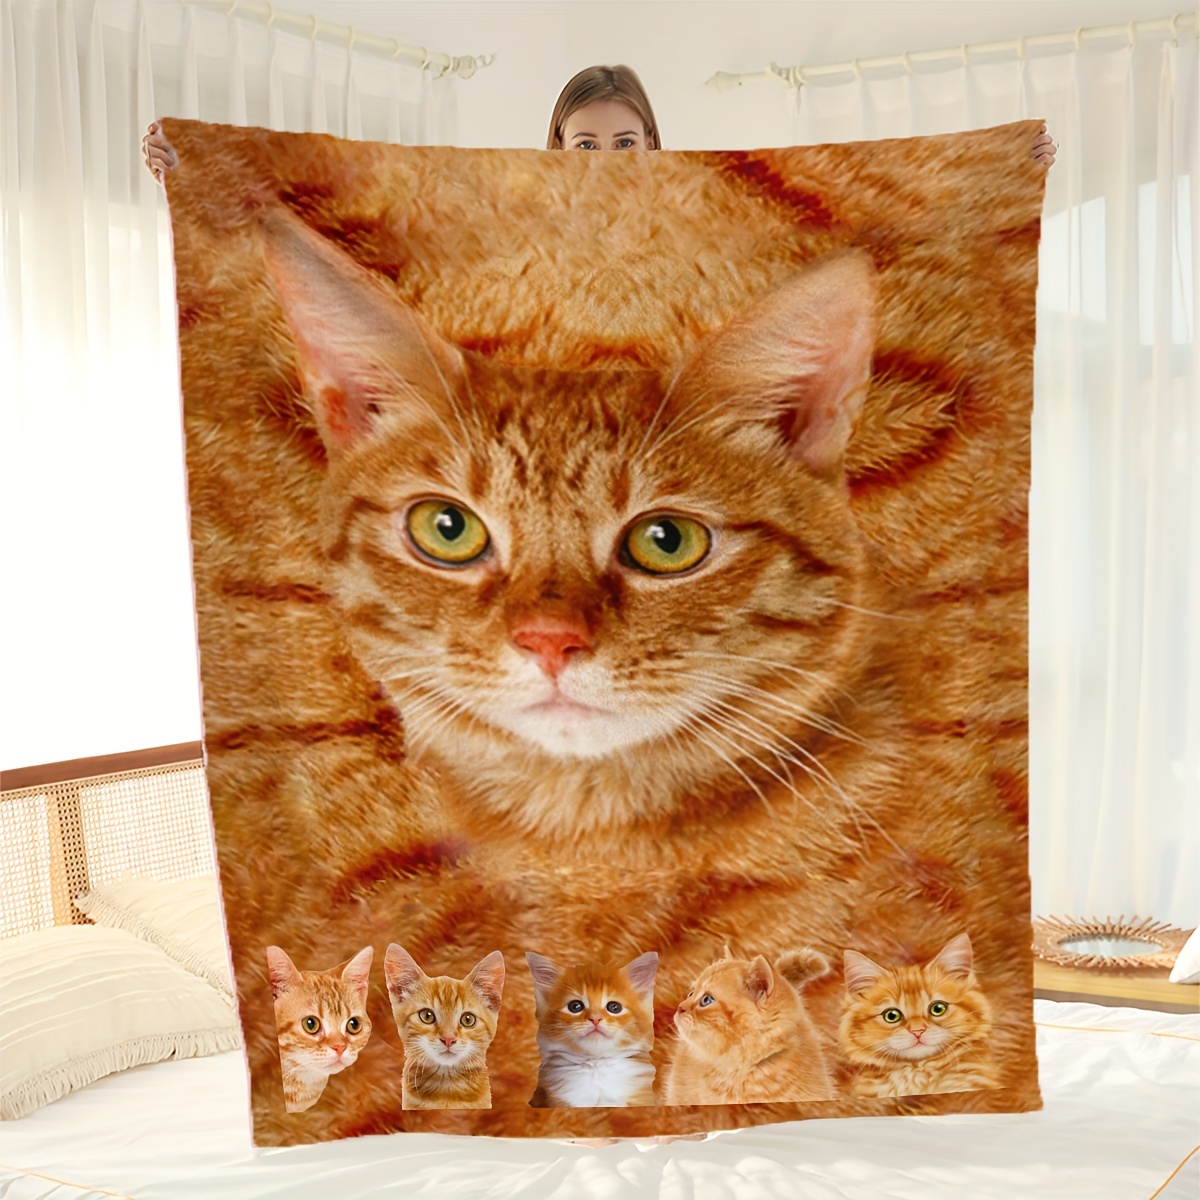 Cat Blanket for Kids Cute Cat Life Theme Flannel Throw Blanket Super Soft  Cozy Plush Blanket Kawaii Blanket for Girls - The Most Beloved Cat Gifts  for All Cat Lovers 60 x